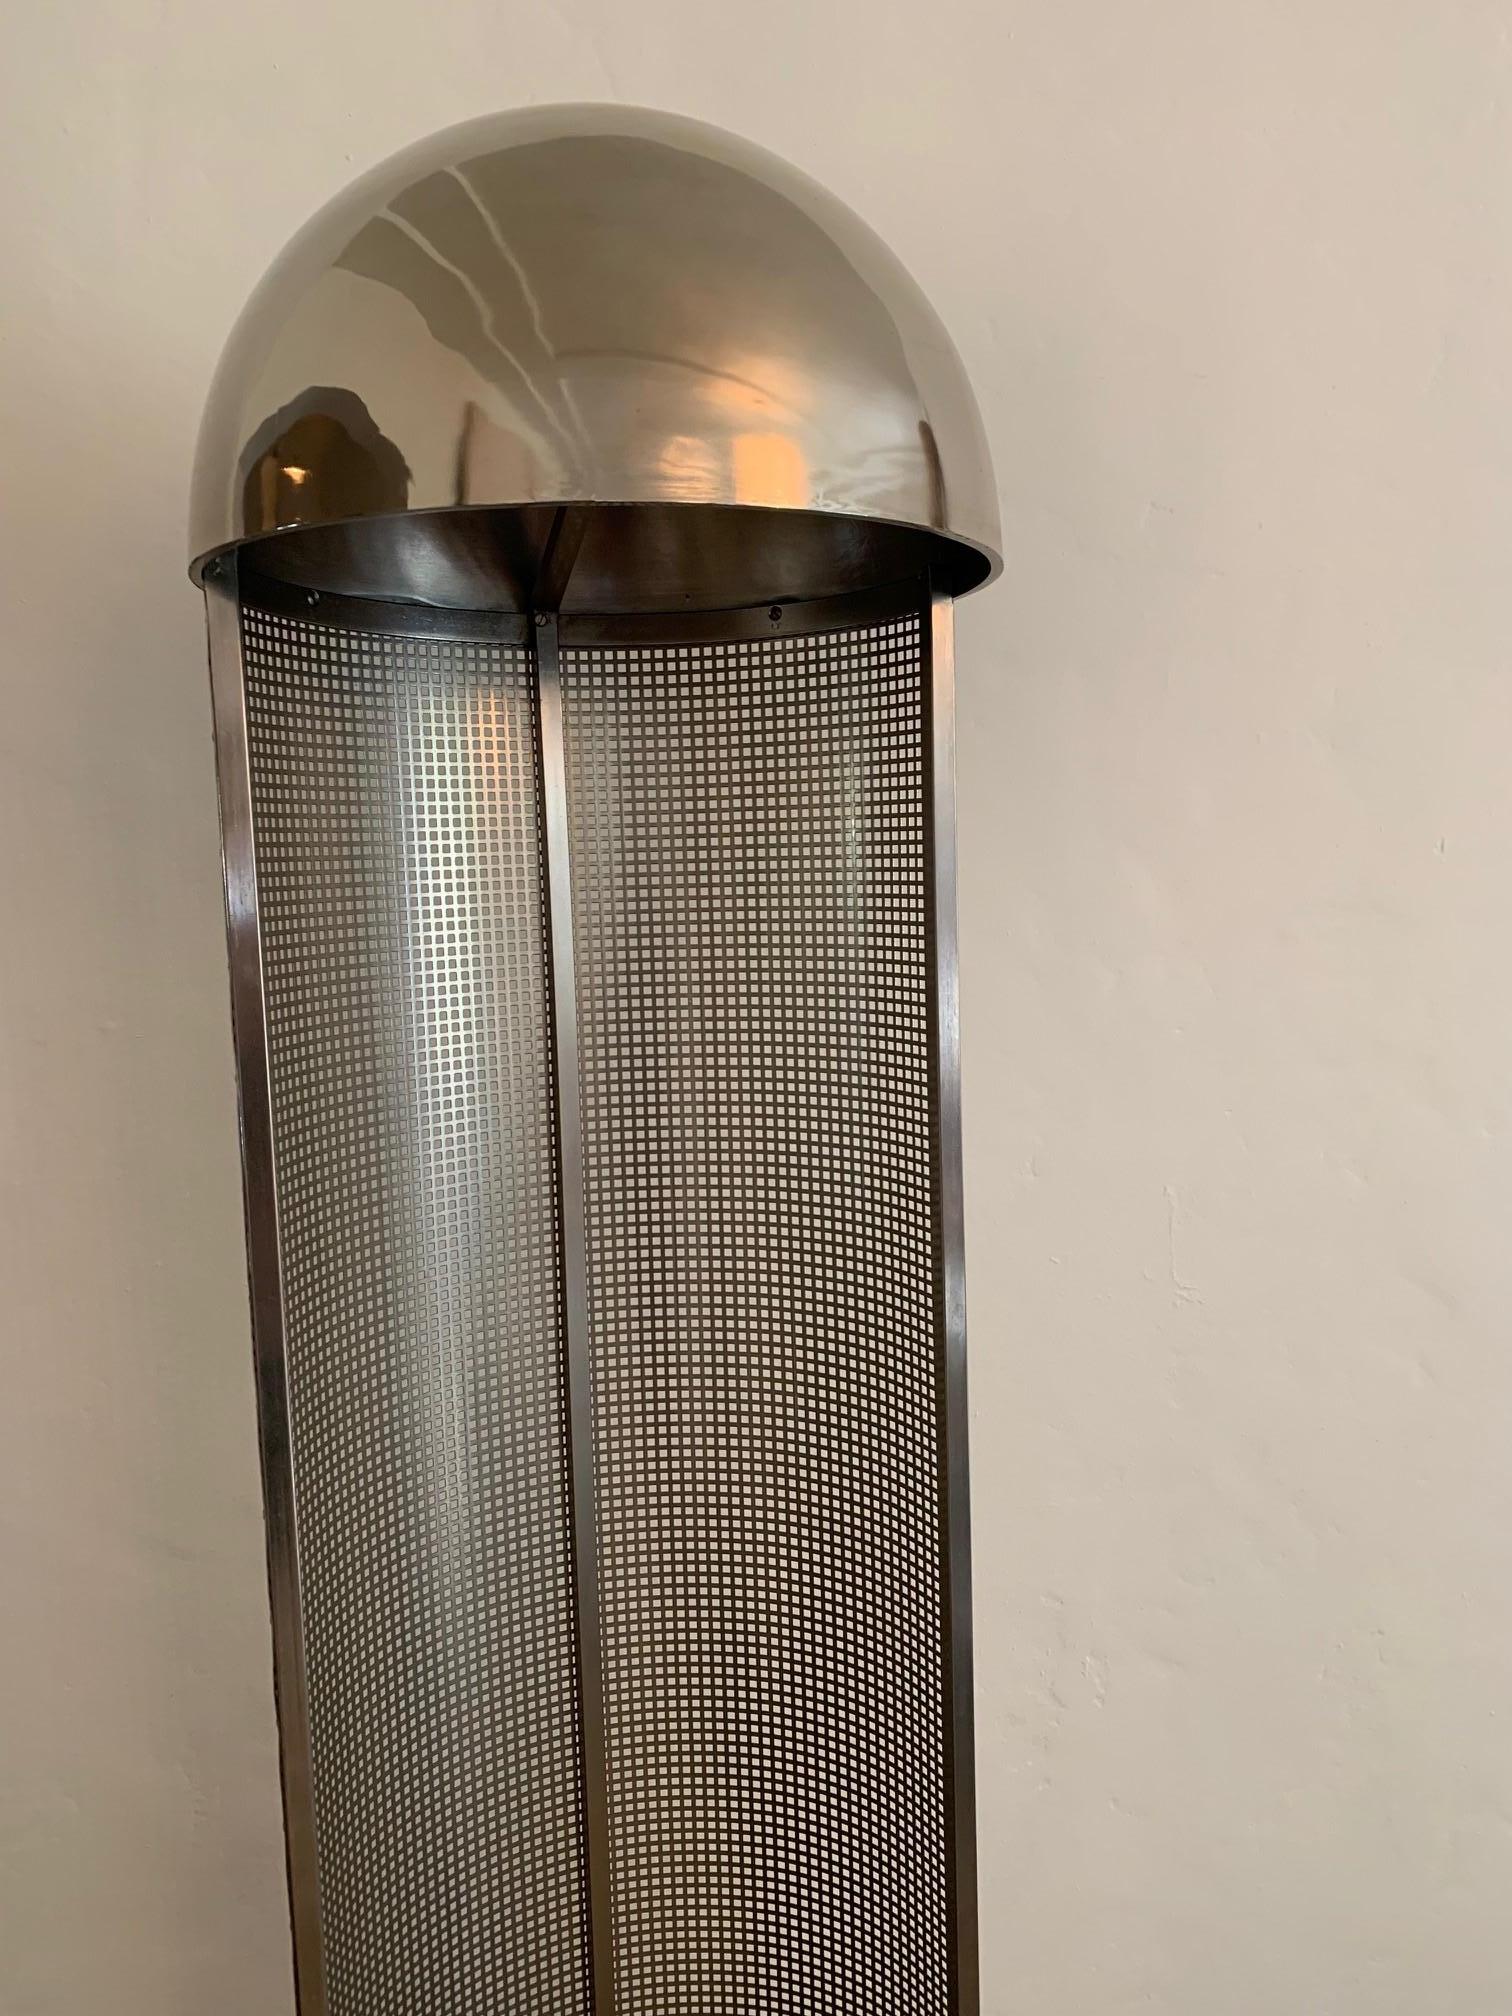 Original design from the early period of the Wiener Werkstatte, circa 1903. This is a later reissue, circa 1980. Nickel finish. Dome over two medium base sockets. Perforated sheet metal creates nice play of light and shadow.